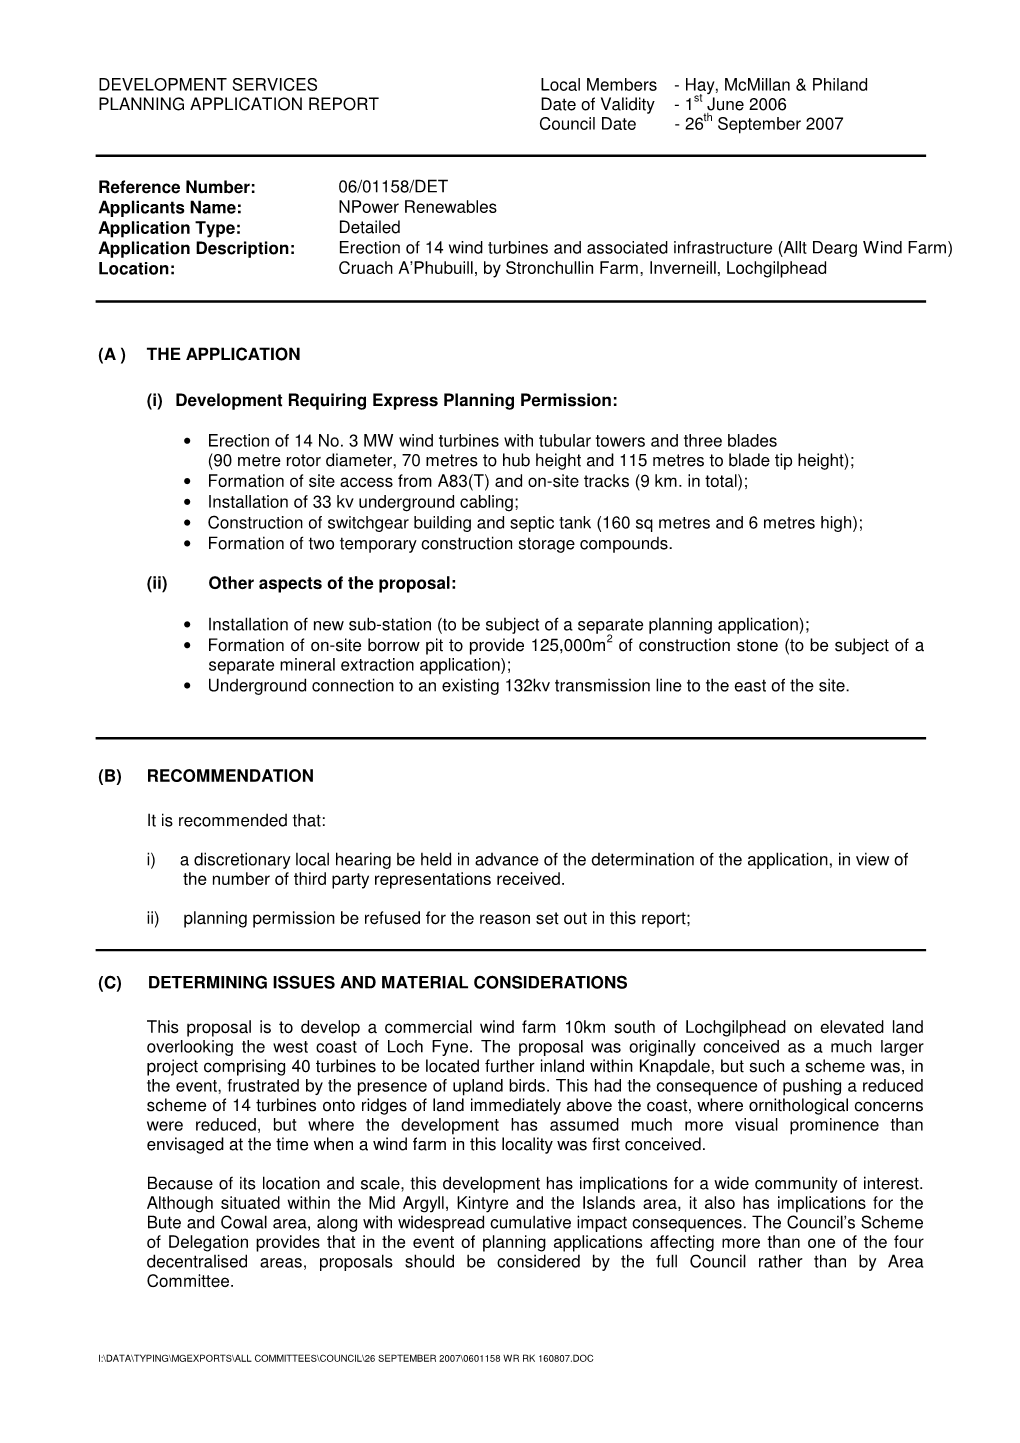 DEVELOPMENT SERVICES Local Members - Hay, Mcmillan & Philand PLANNING APPLICATION REPORT Date of Validity - 1St June 2006 Council Date - 26 Th September 2007